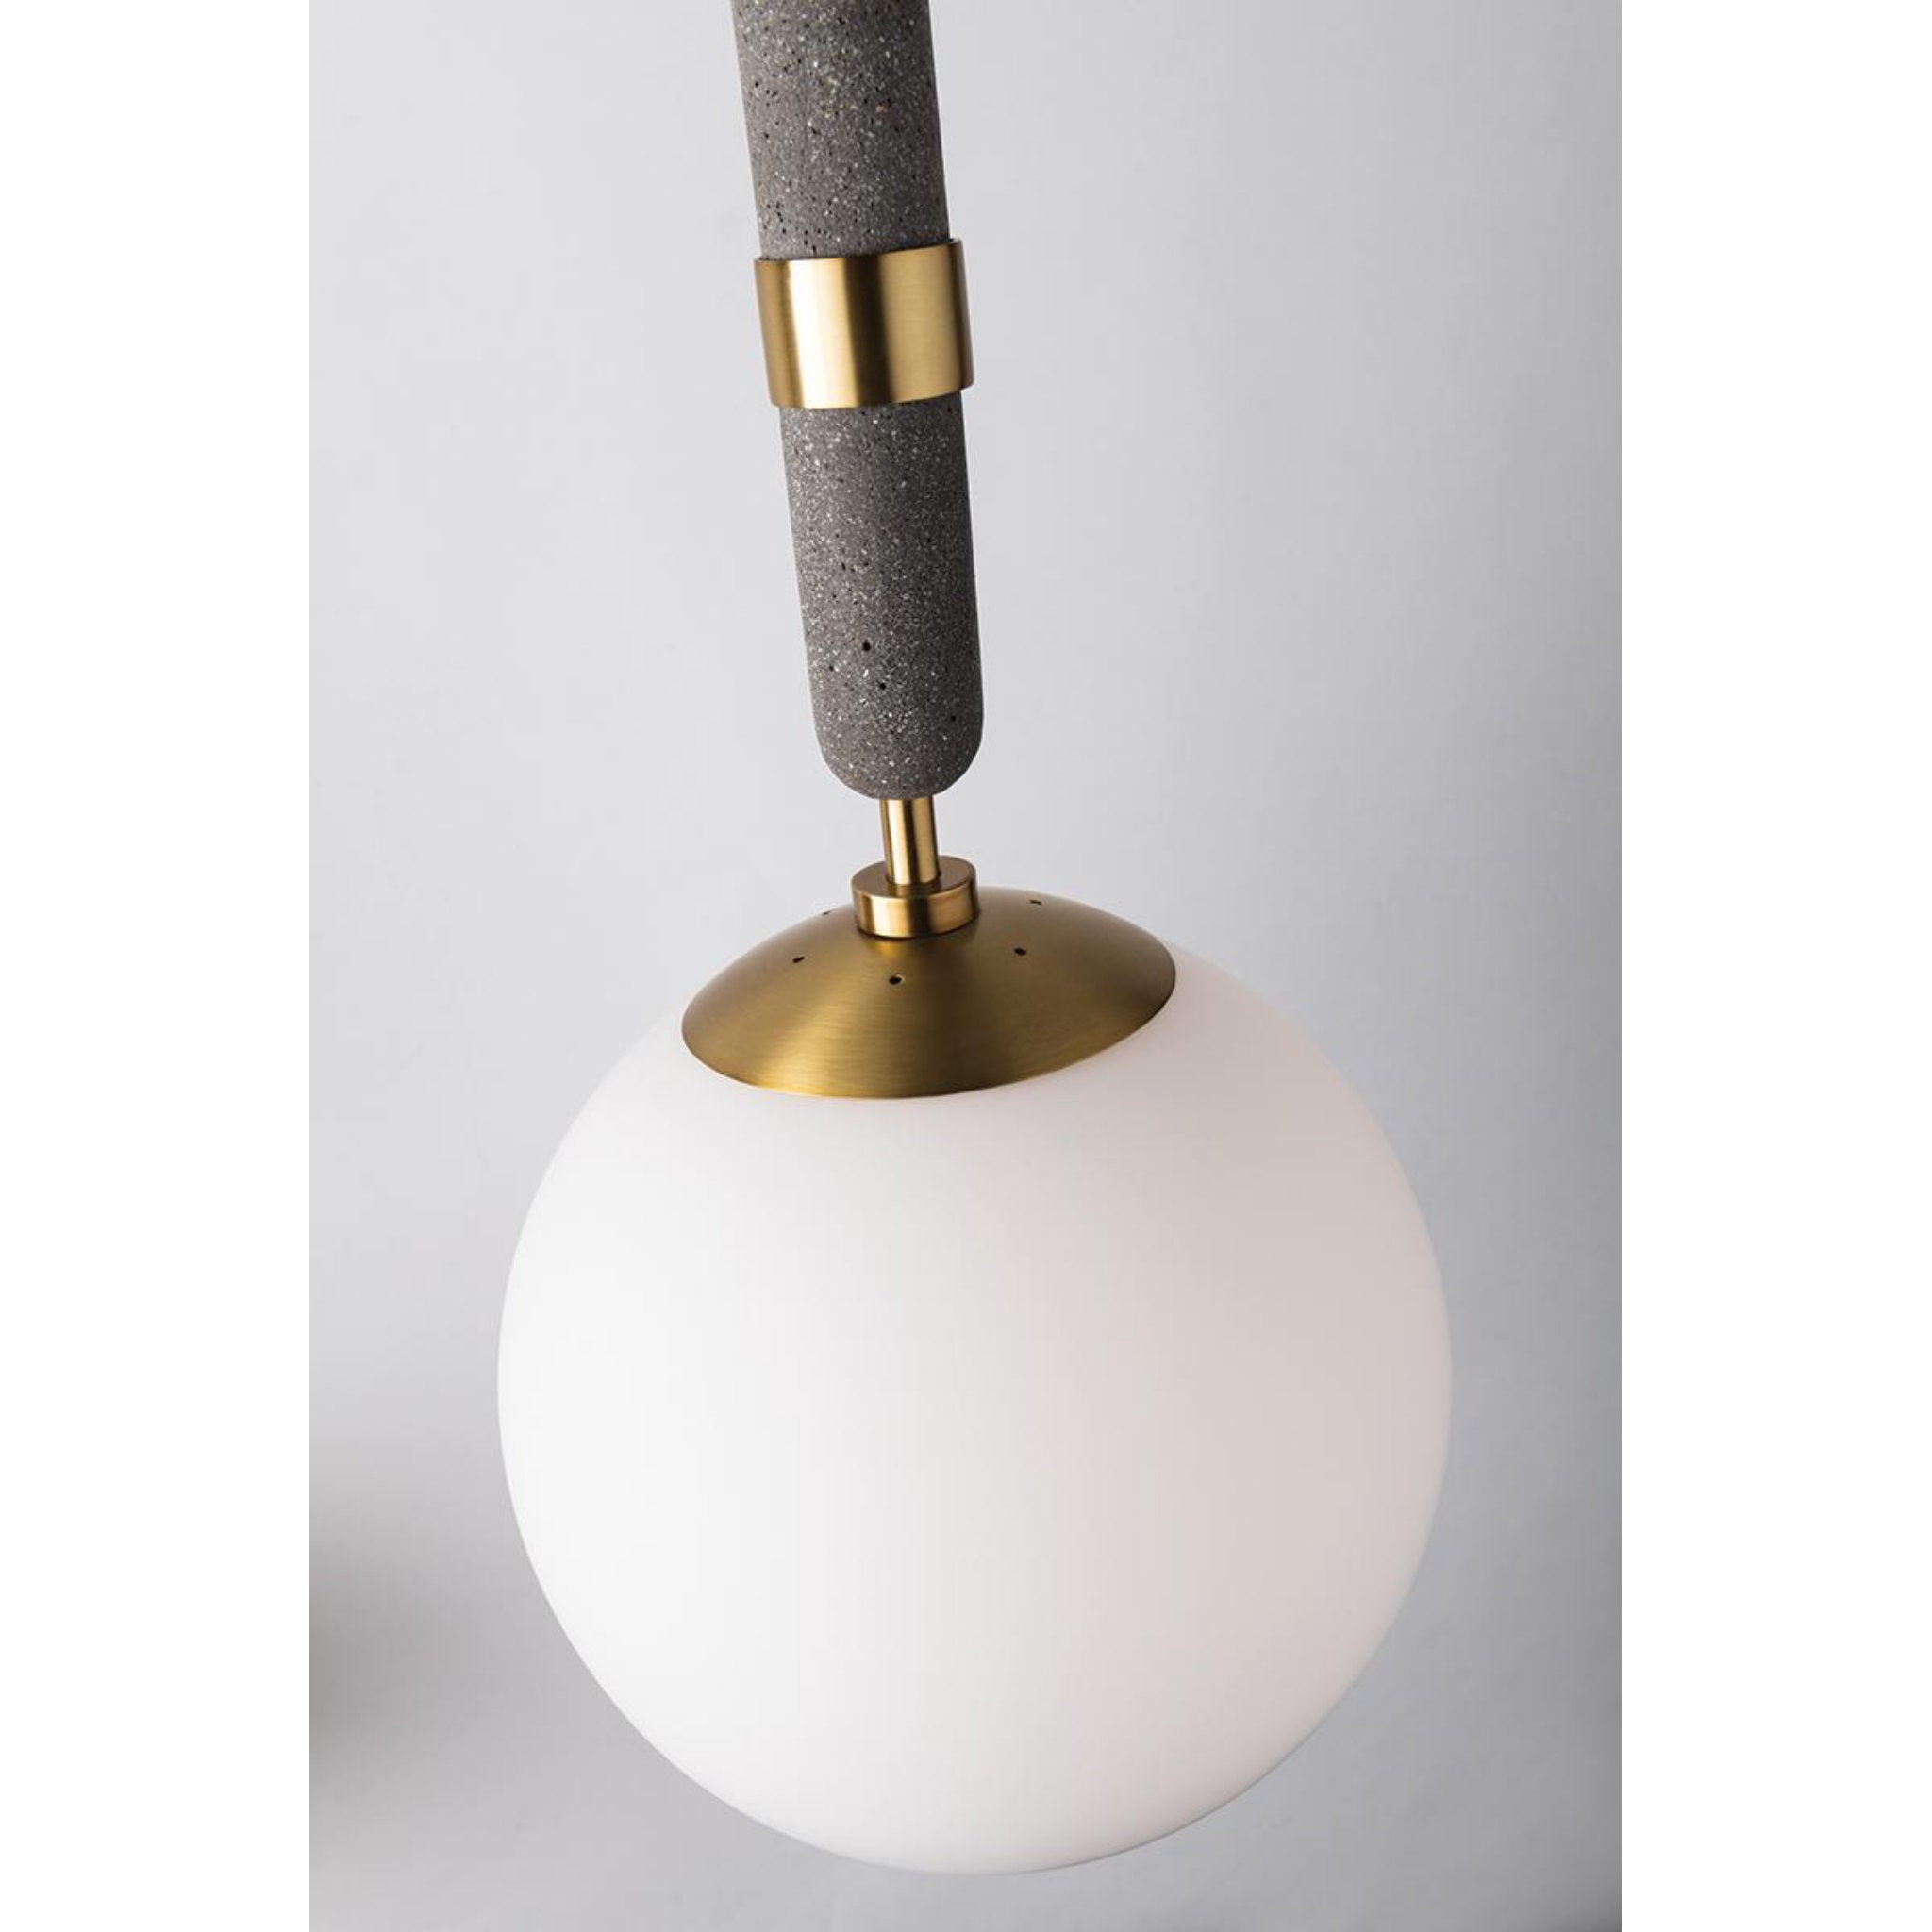 Brielle 1-Light Pendant in Polished Nickel